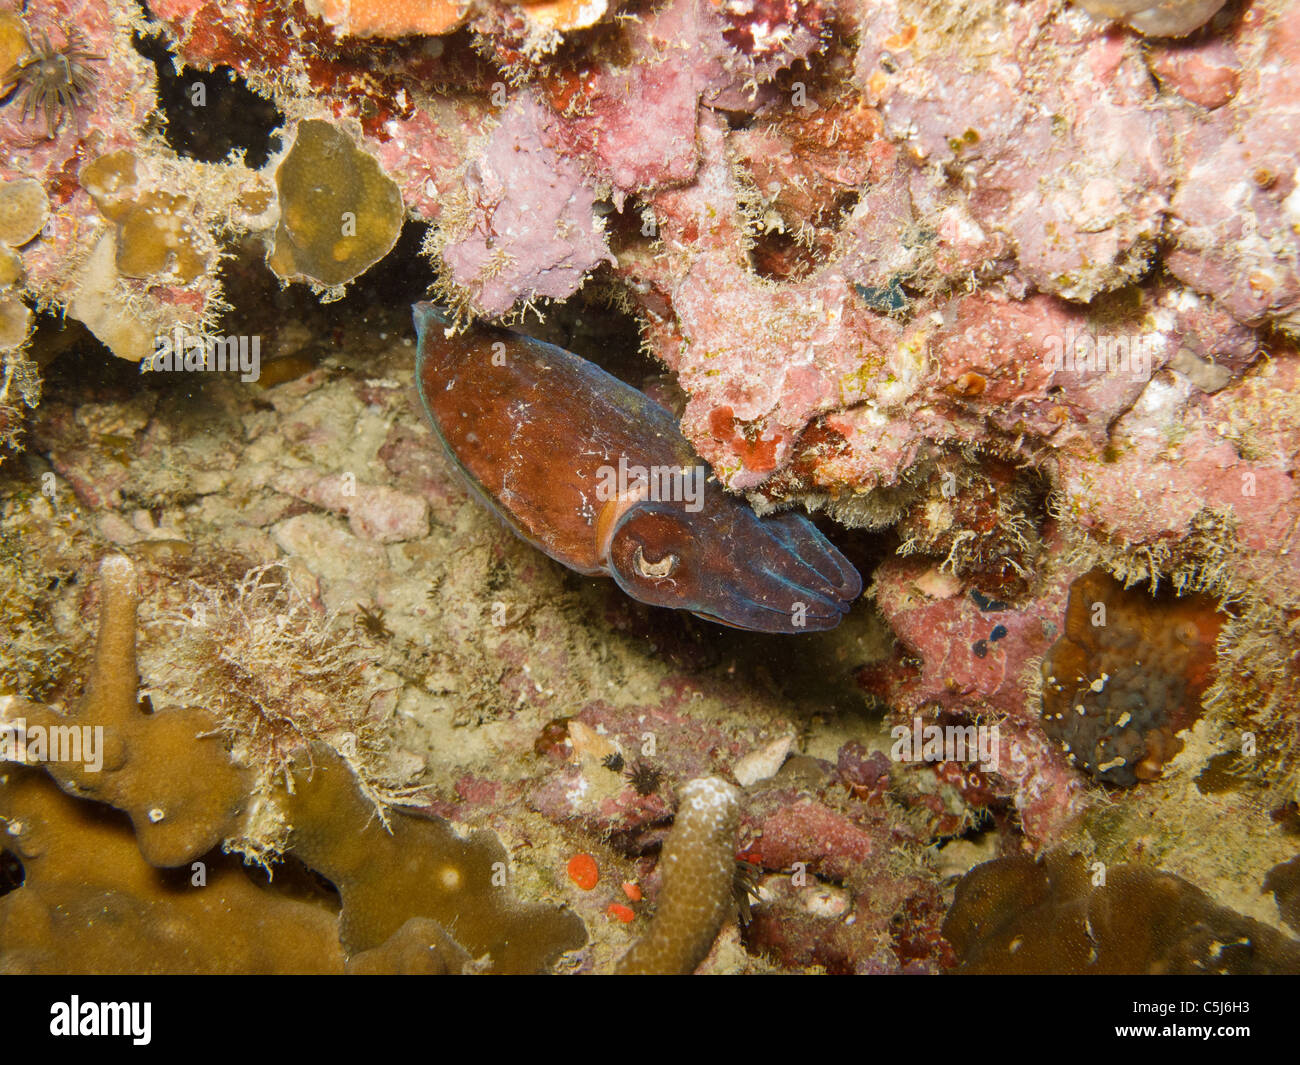 Tiny cuttlefish found in night dive Stock Photo